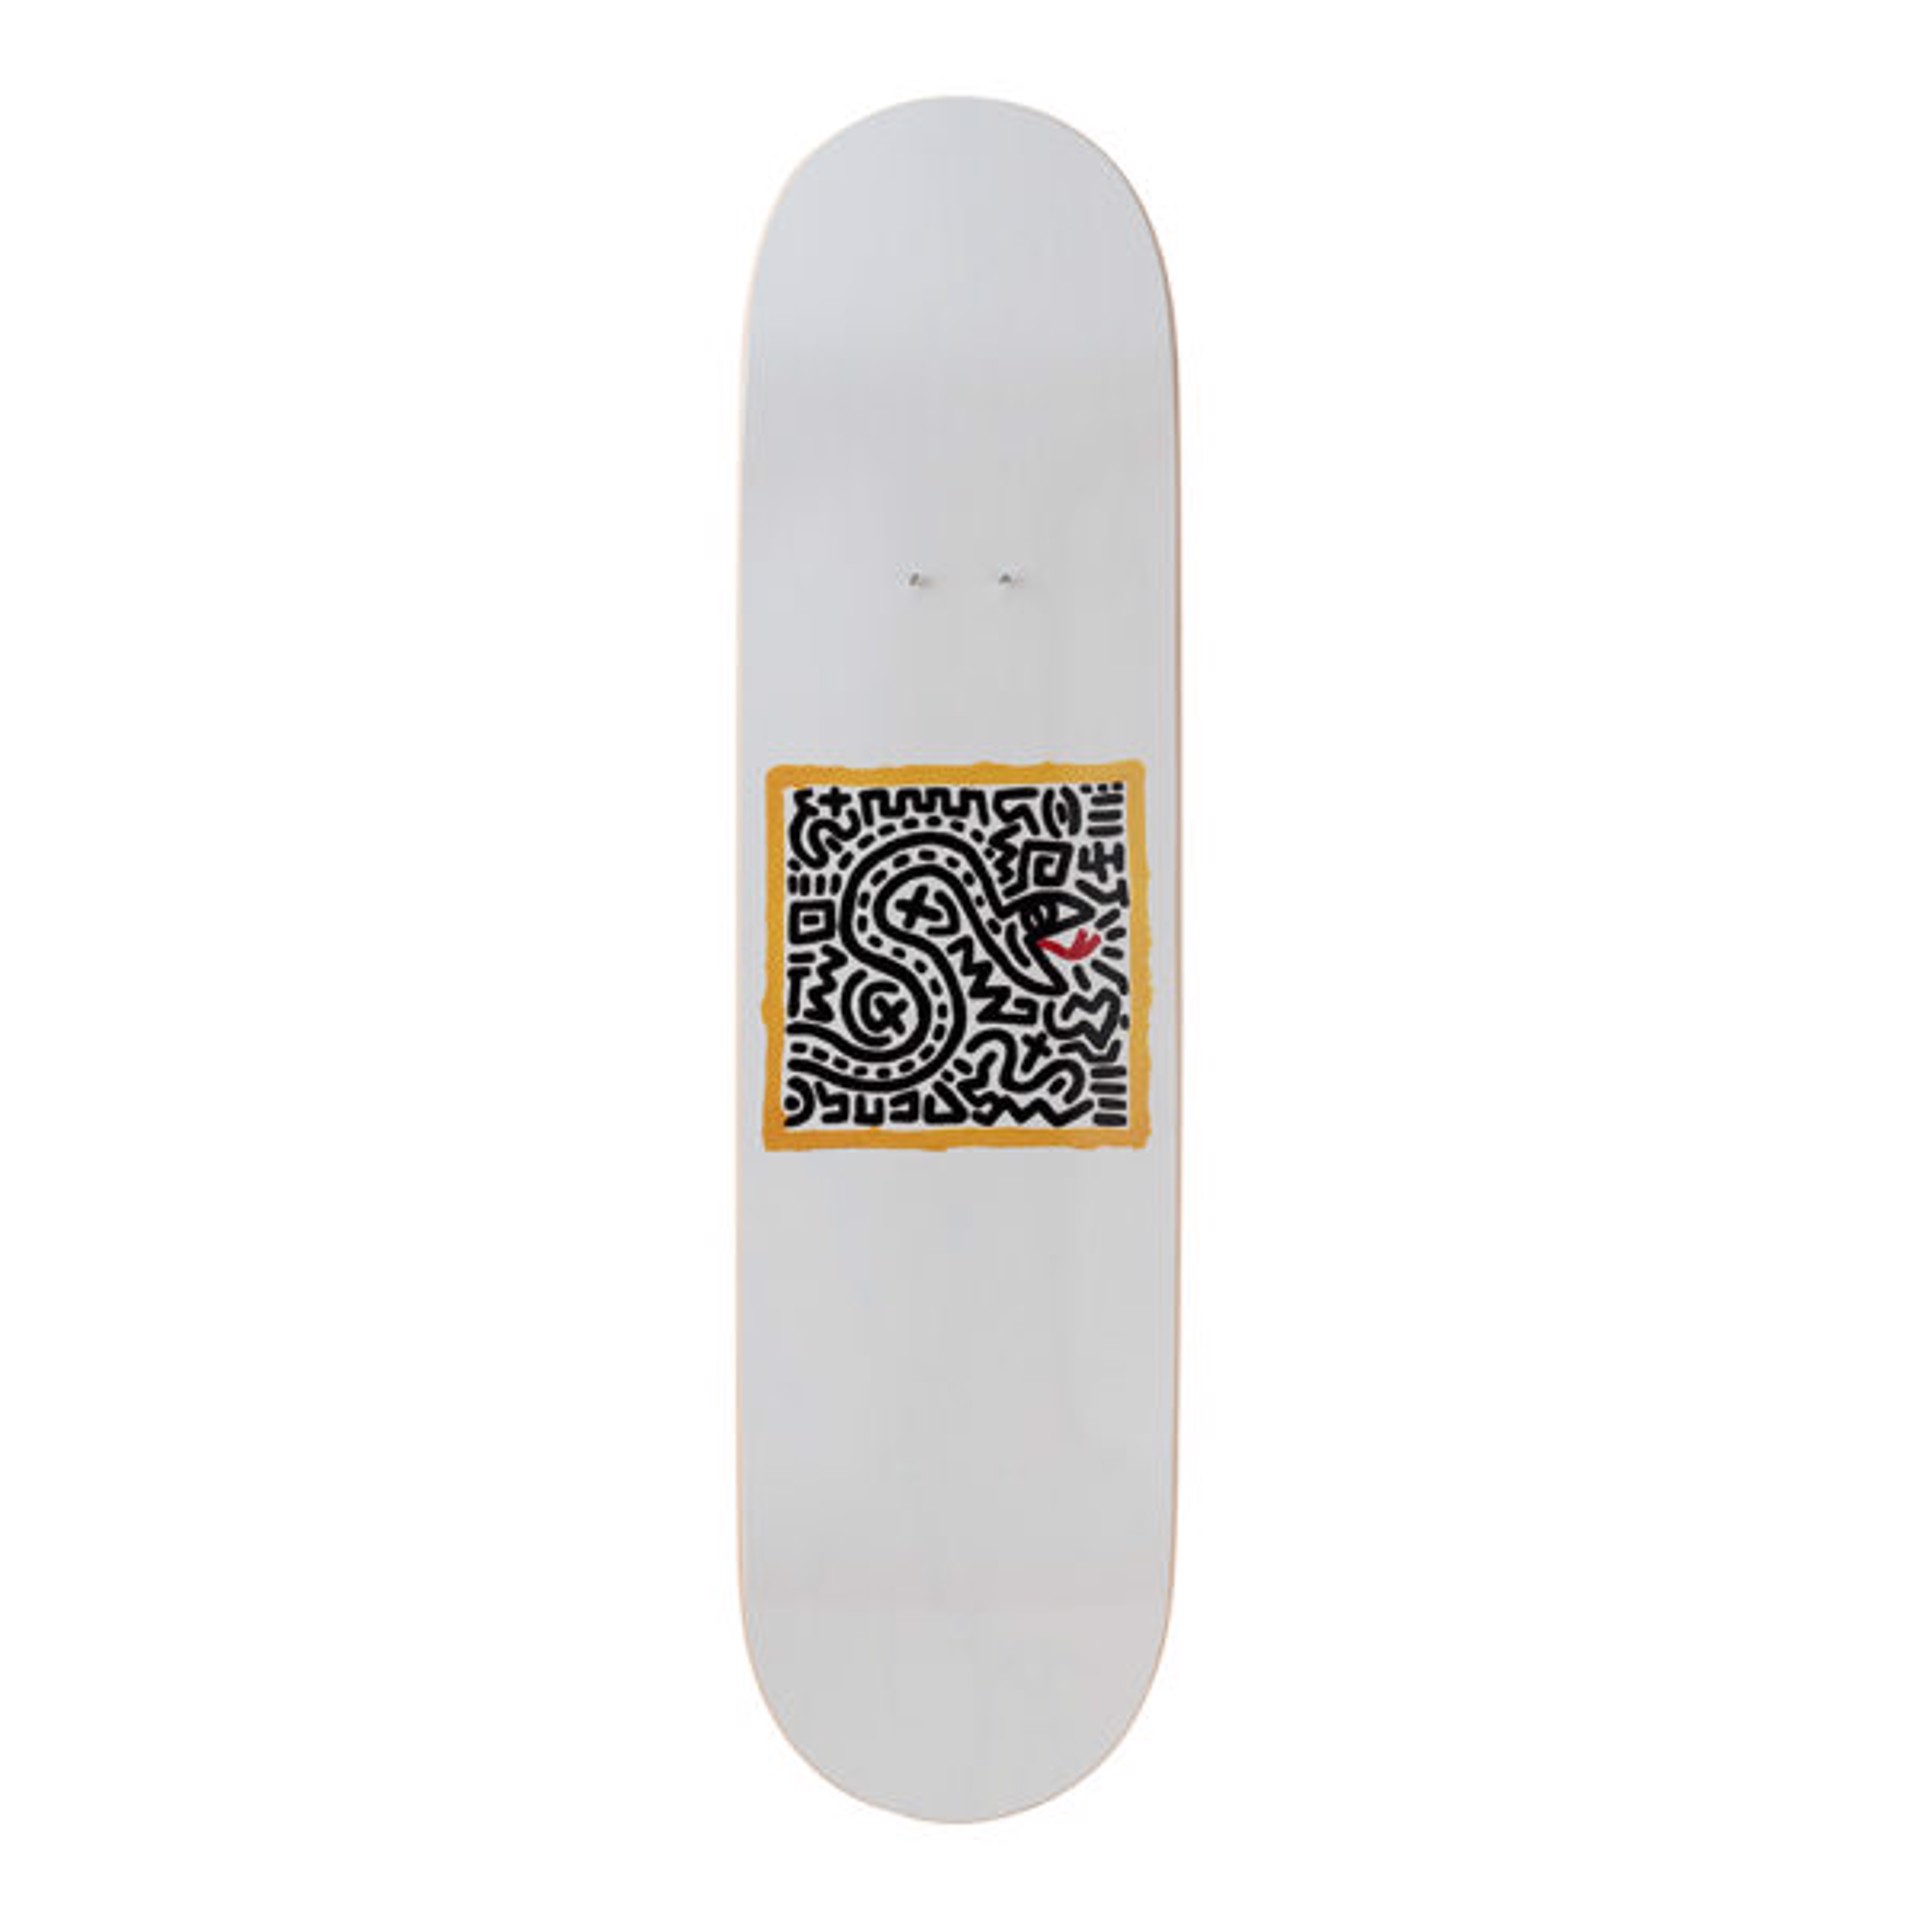 Untitled (Snake) Skate Deck by Keith Haring